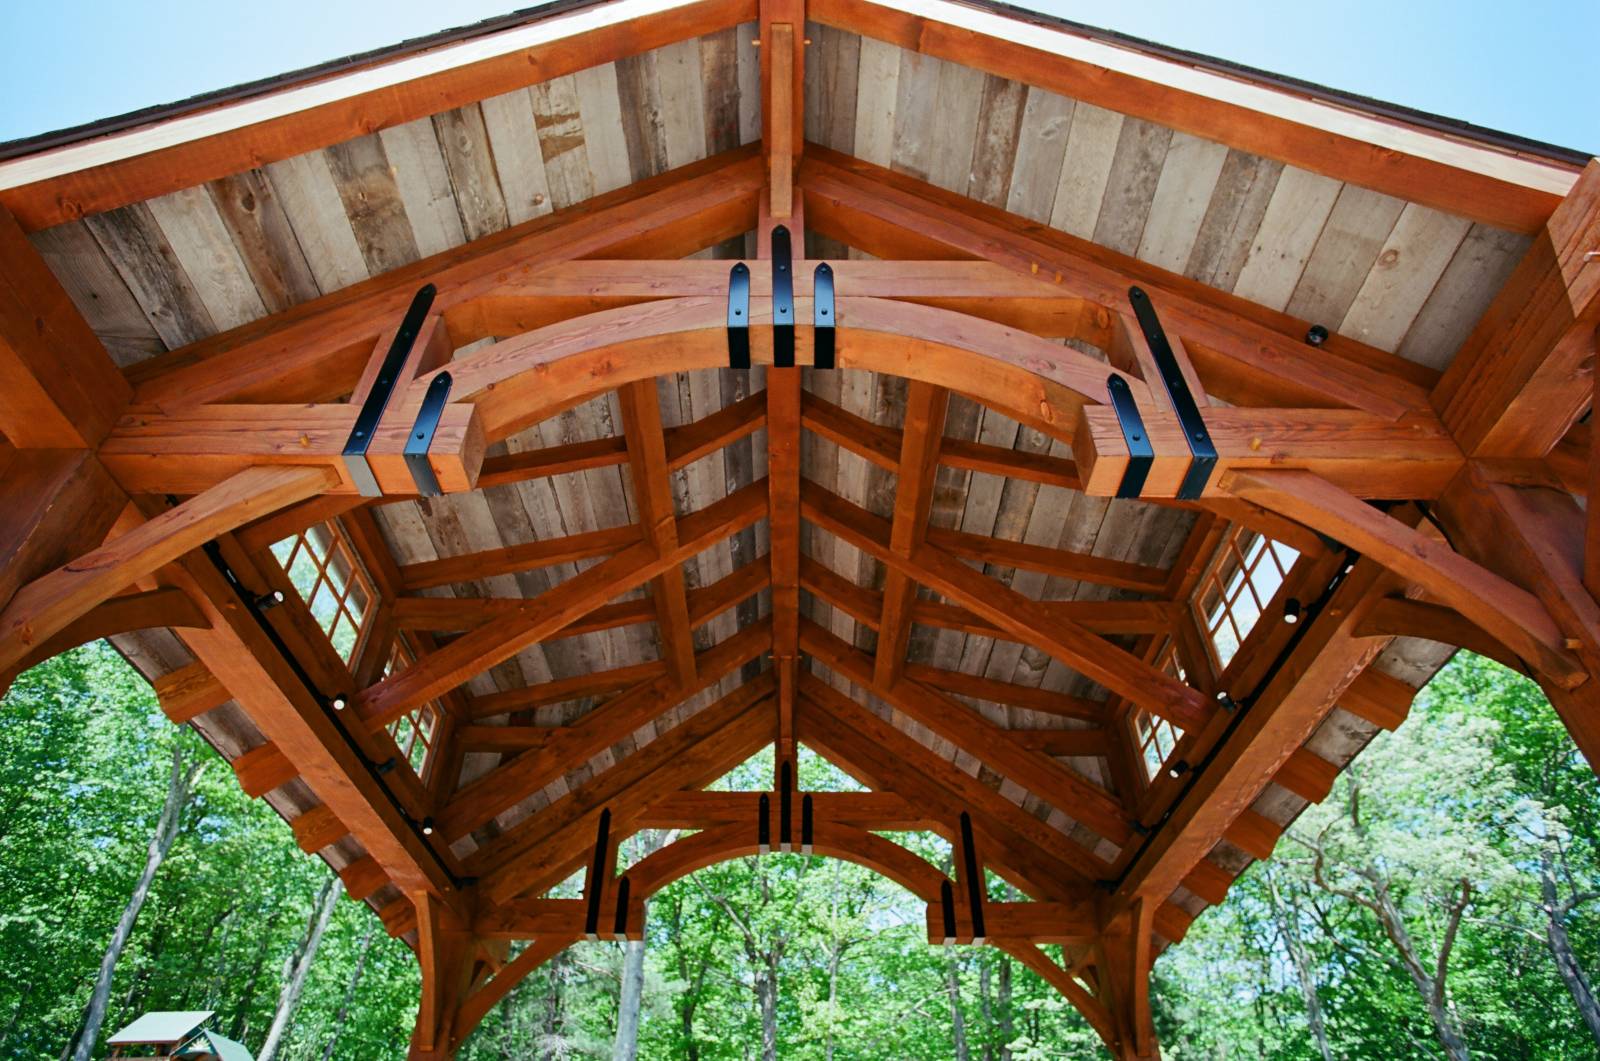 Alpine Timber Frame Pavilion Structure • Reclaimed Barn Board Roof Decking